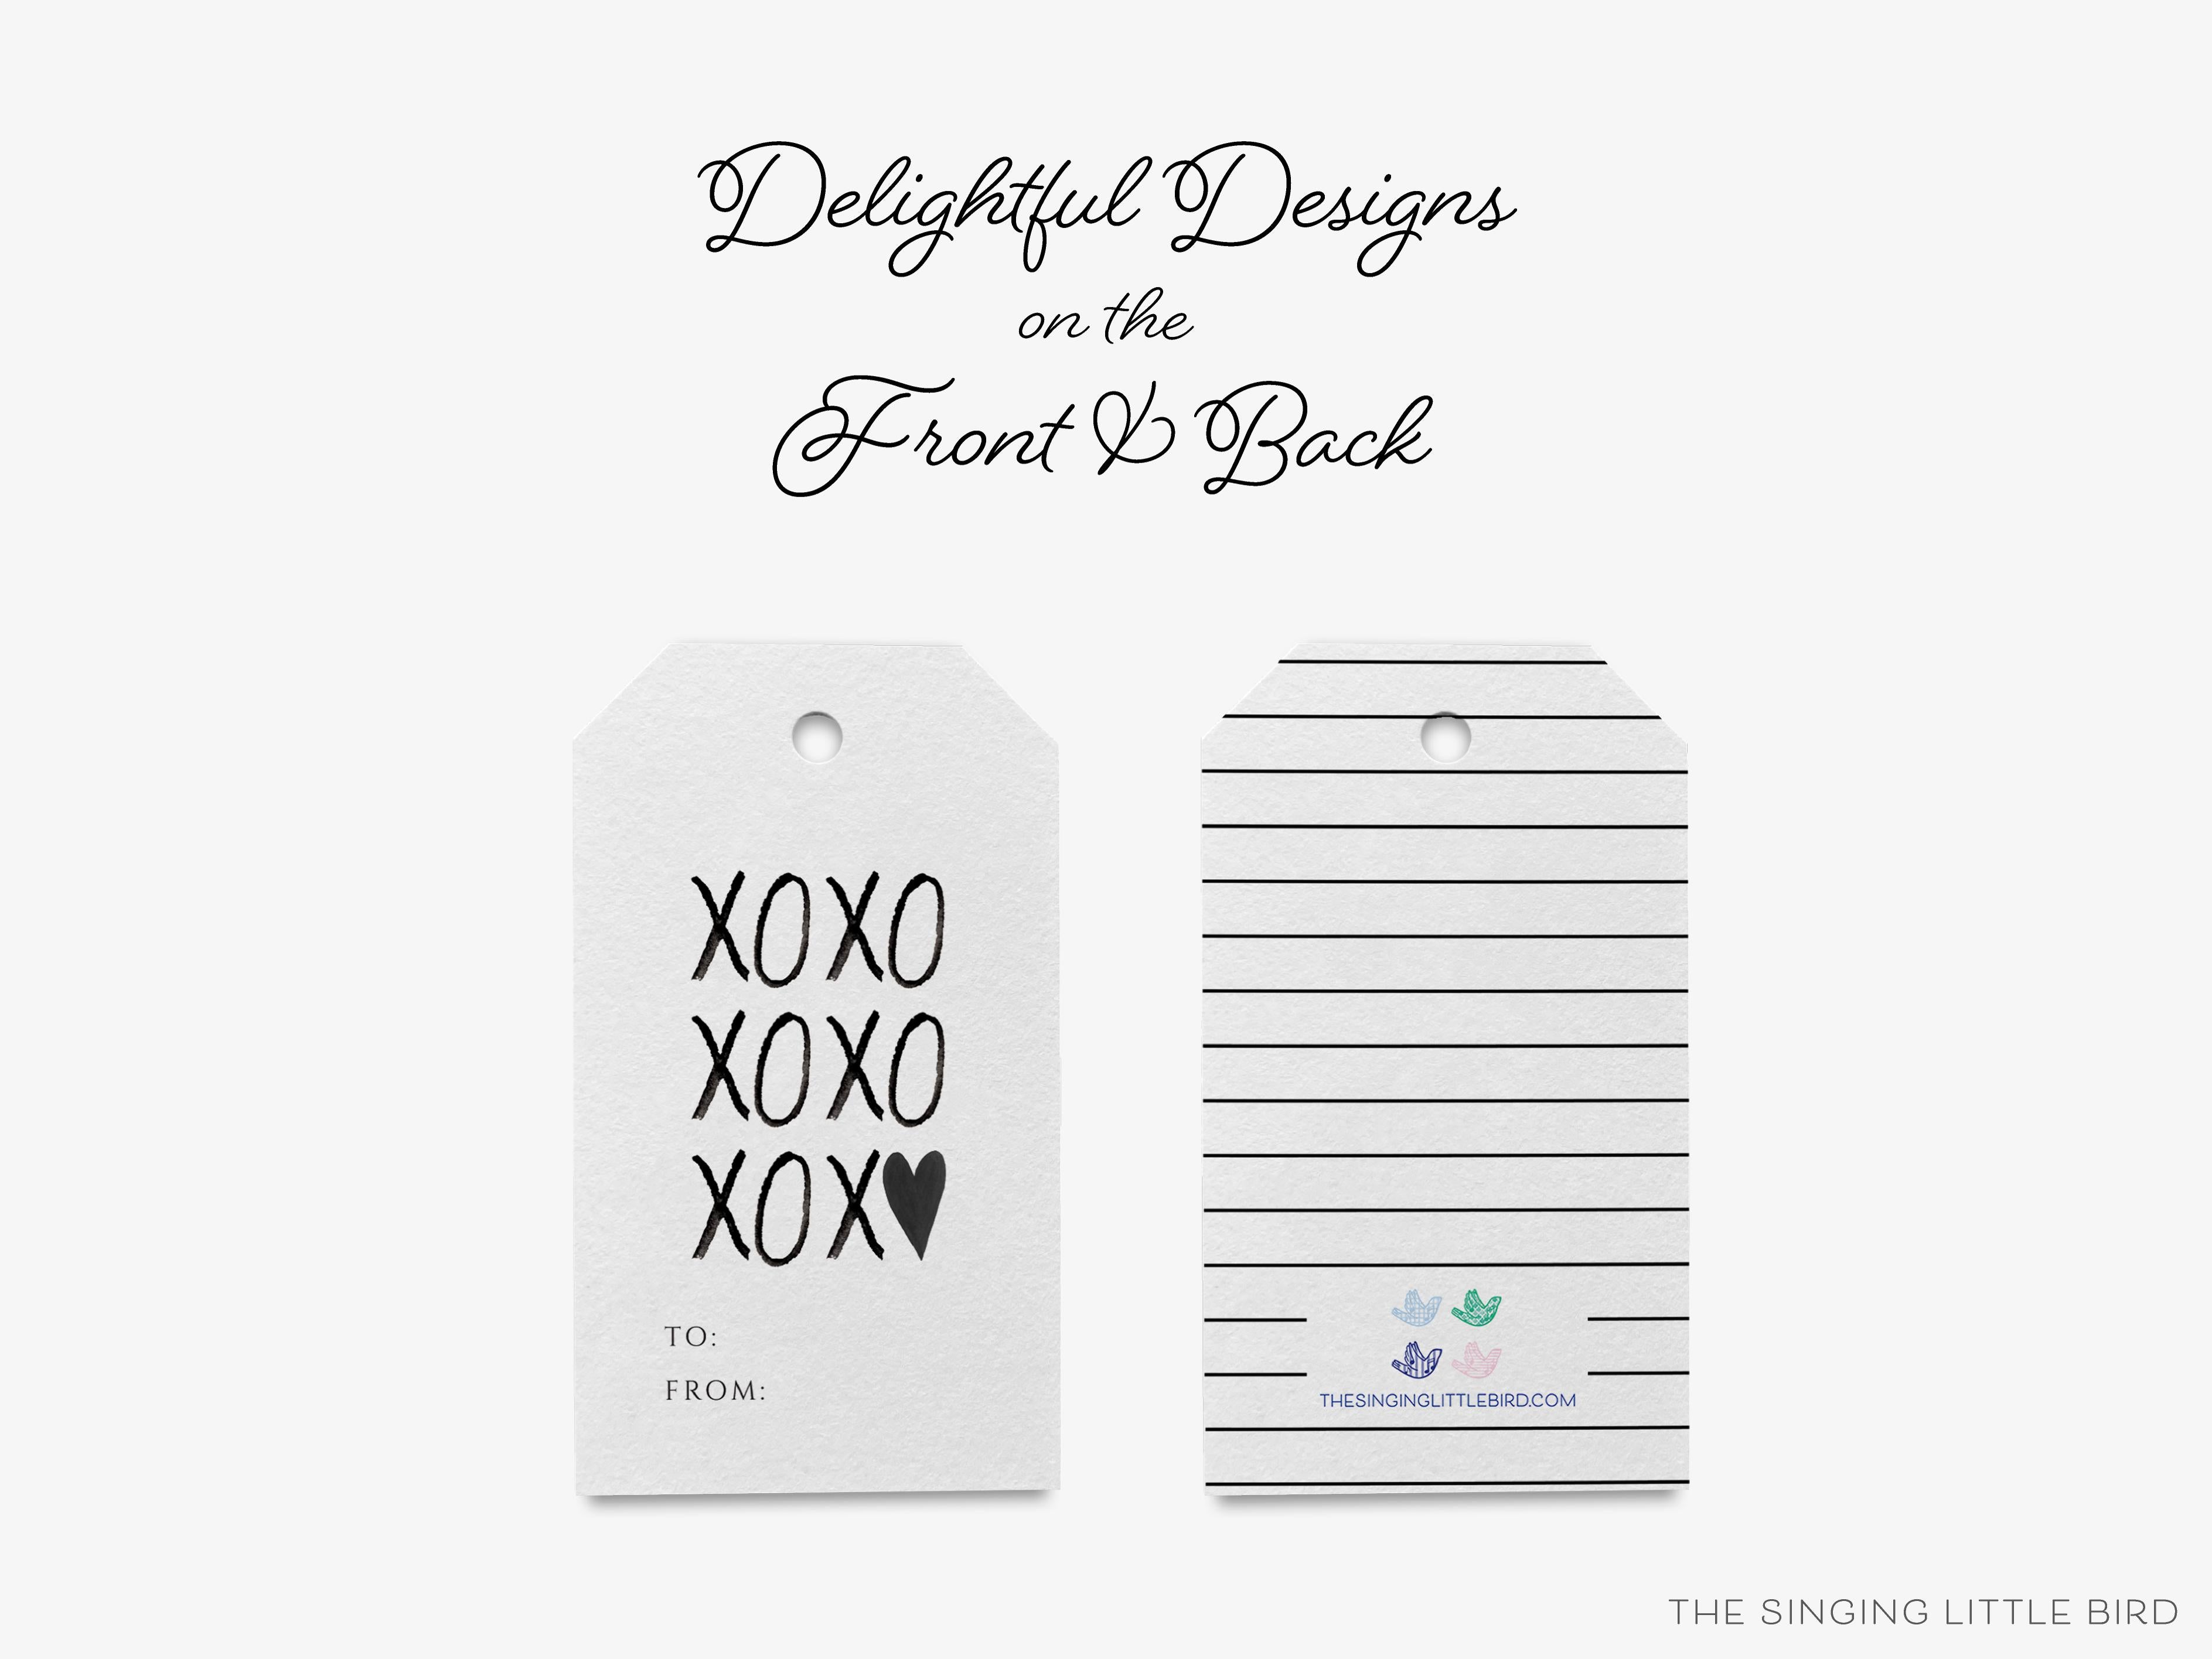 XOXO Black and White Gift Tags [Set of 8]-These gift tags come in sets, hole-punched with white twine and feature our hand-painted watercolor xo's, printed in the USA on 120lb textured stock. They make great tags for gifting or gifts for the black and white chic lover in your life.-The Singing Little Bird